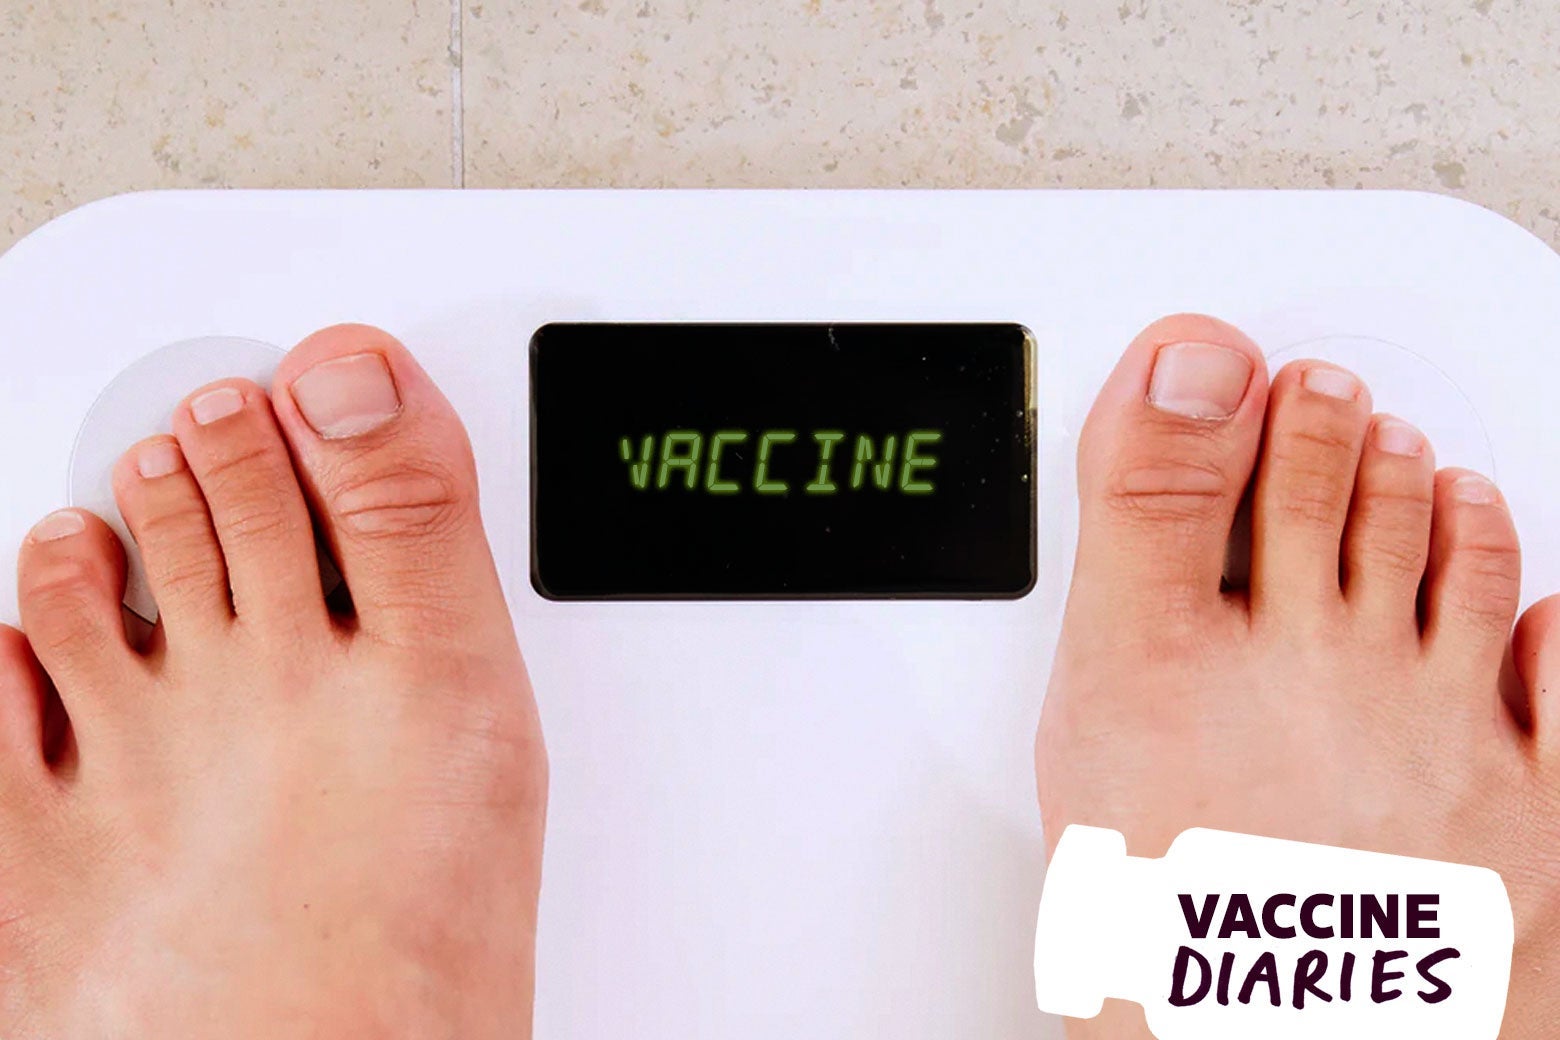 Feet on a scale. Where the weight would be, it says, "VACCINE."